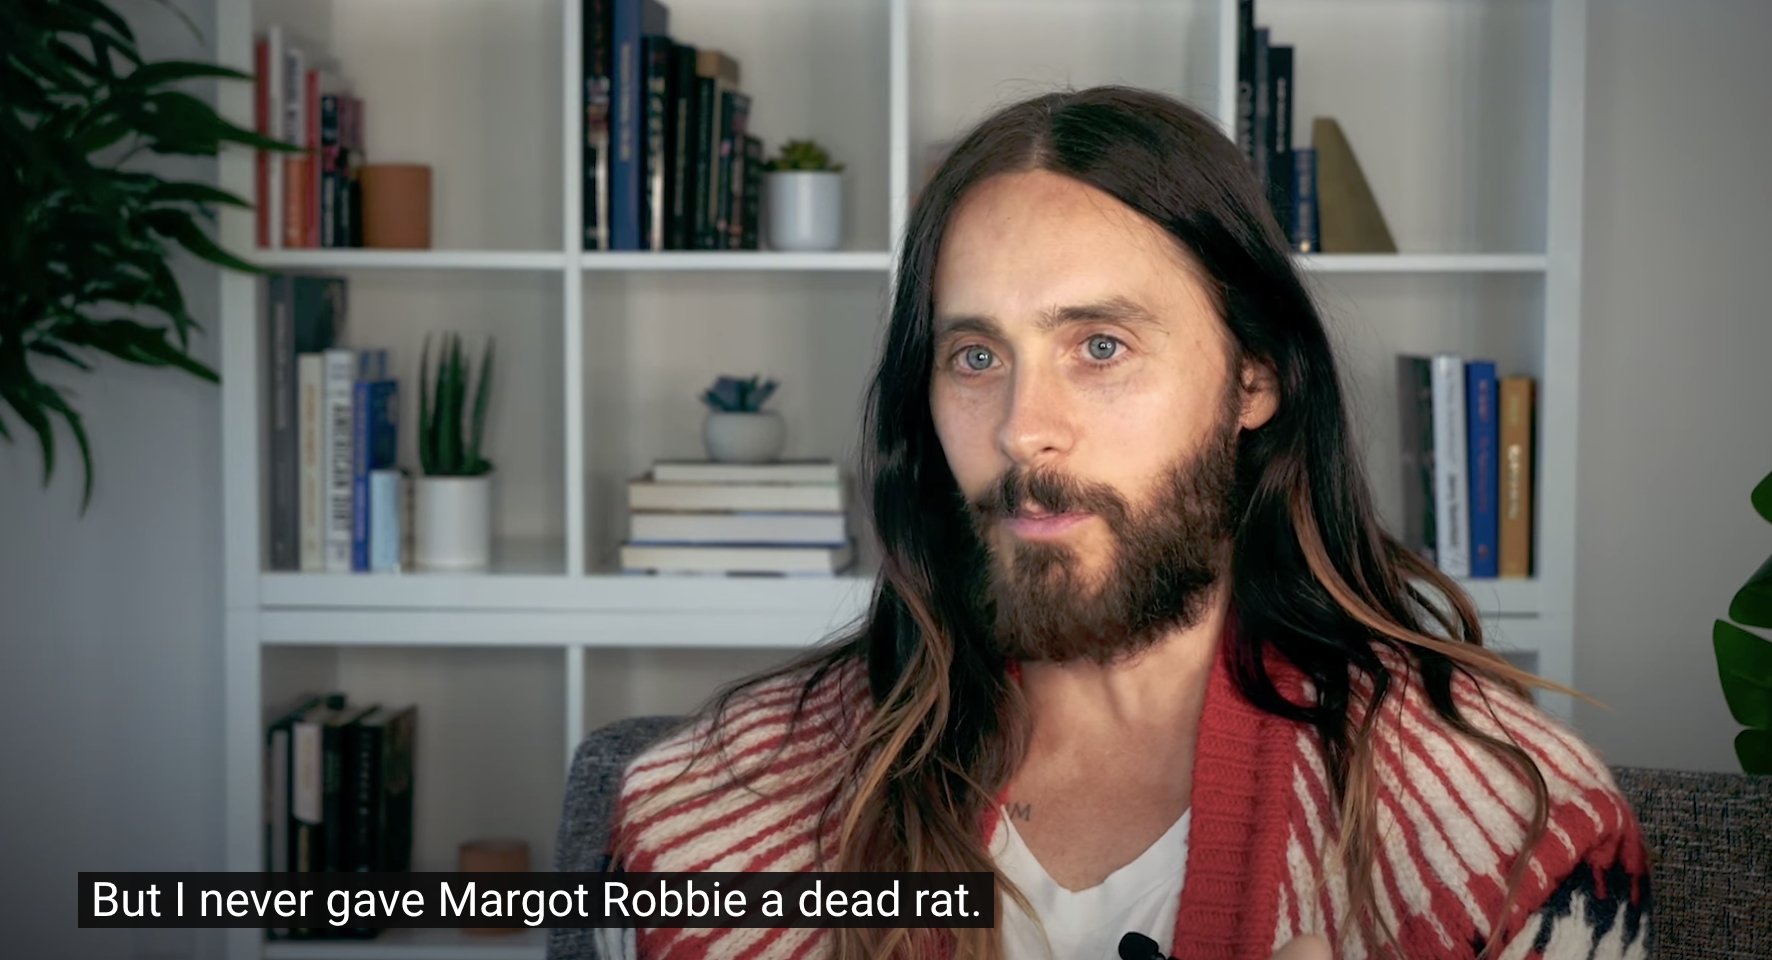 Jared Leto Claims That He Never Gave Margot Robbie A Dead Rat While They Were Making ‘Suicide Squad’